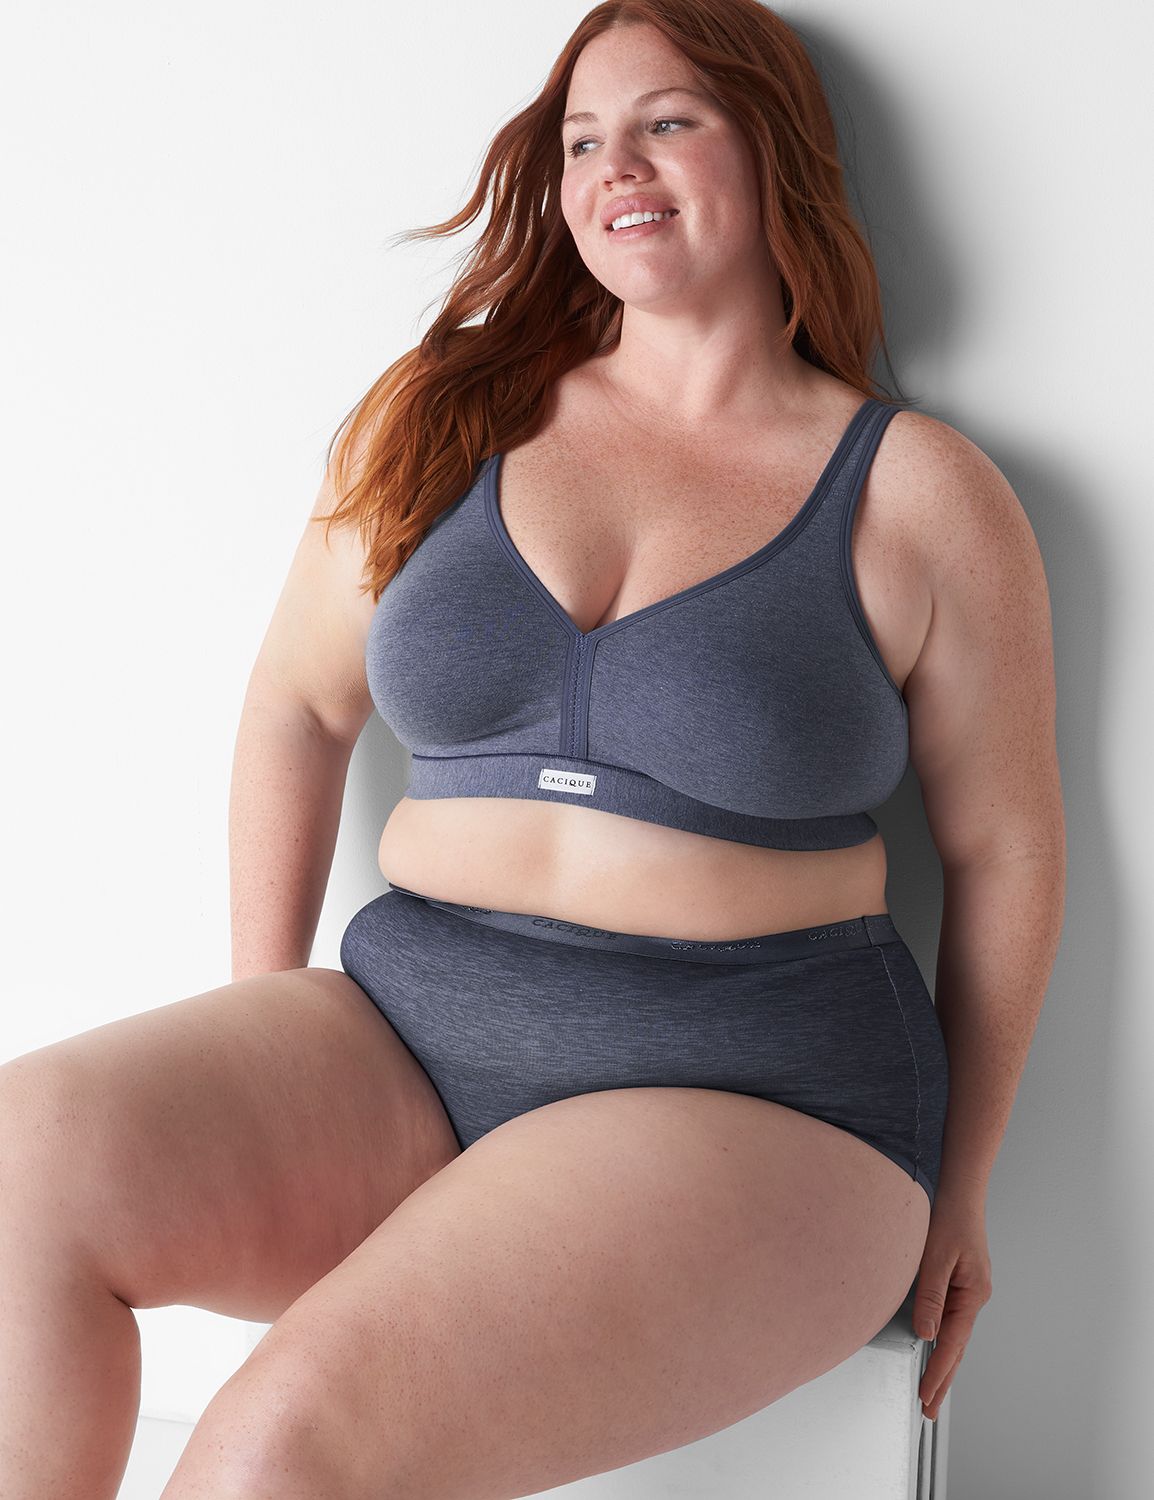 Cacique Lane Bryant, Women's Fashion, New Undergarments & Loungewear on  Carousell